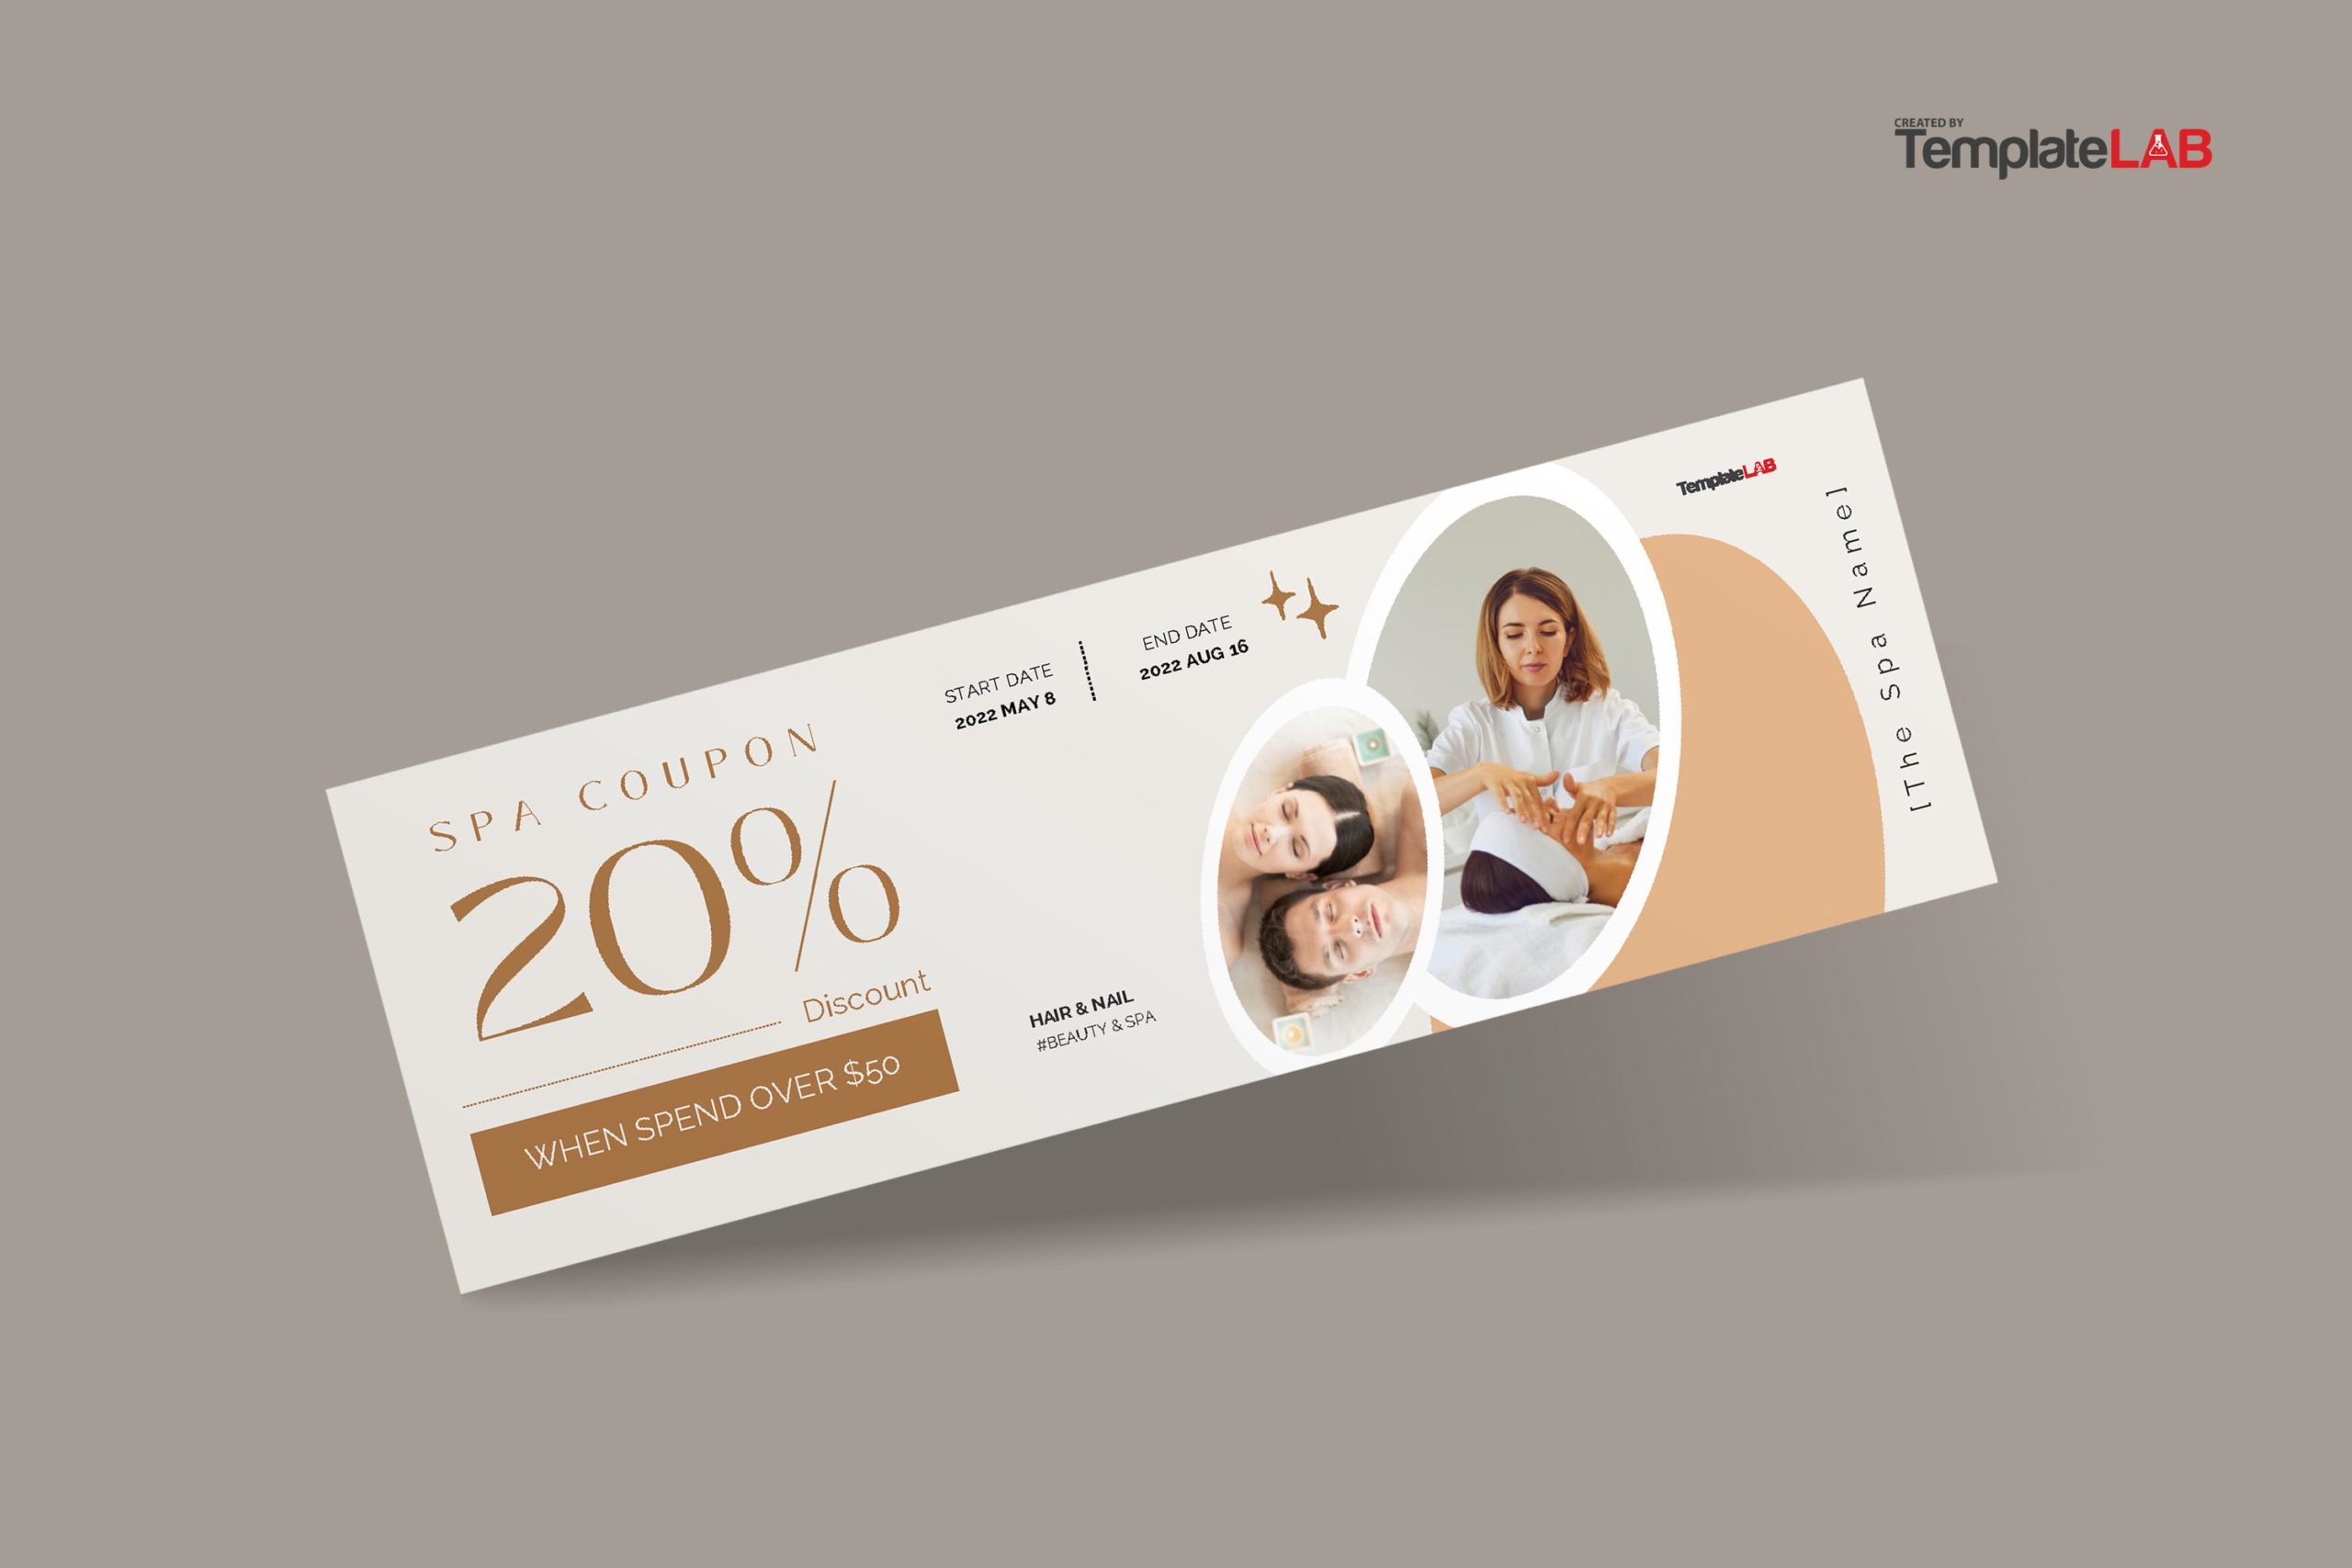 Free Spa Coupon Template